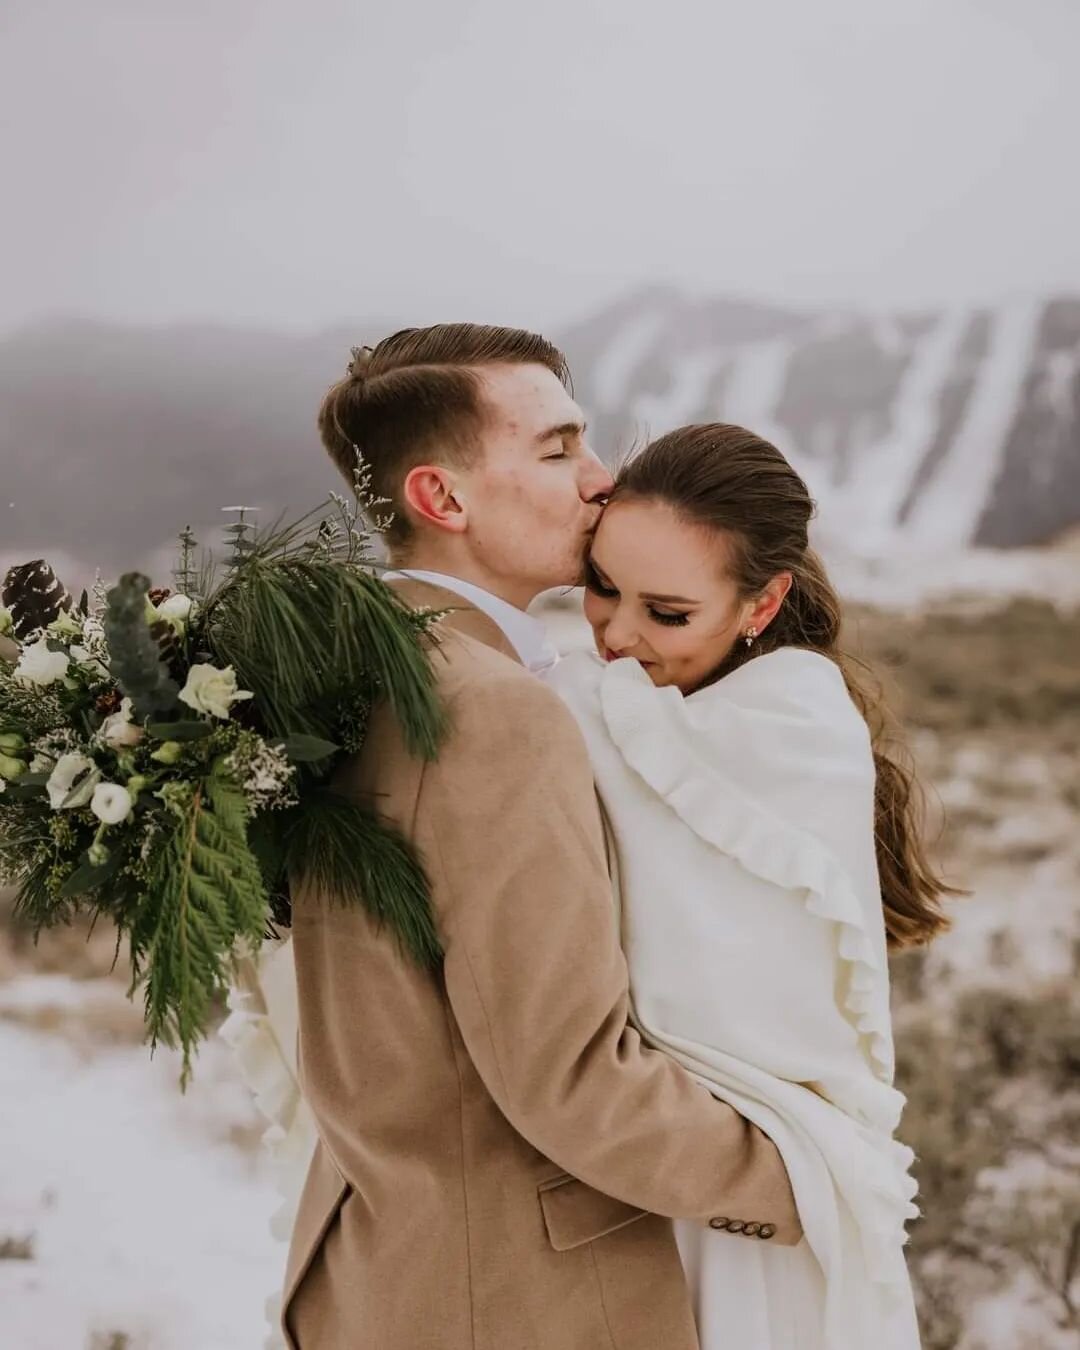 The snow is falling and we are dreaming of all those winter wonderland weddings ❄️